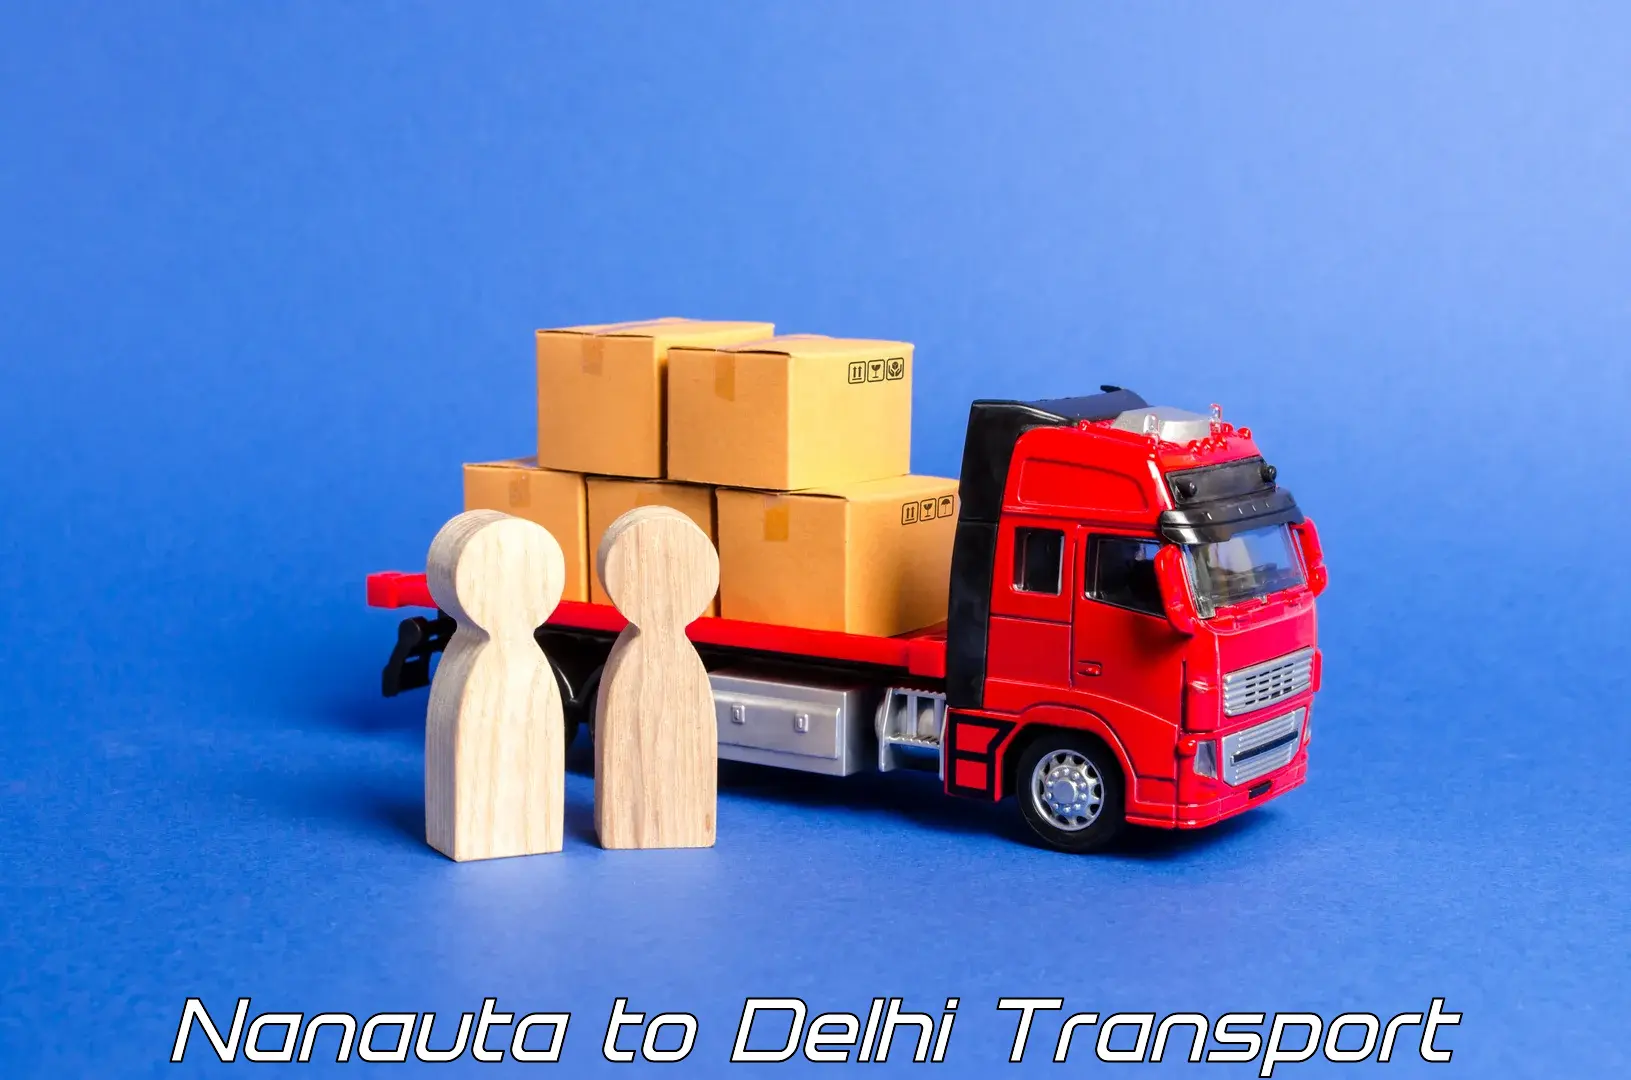 Truck transport companies in India Nanauta to NCR